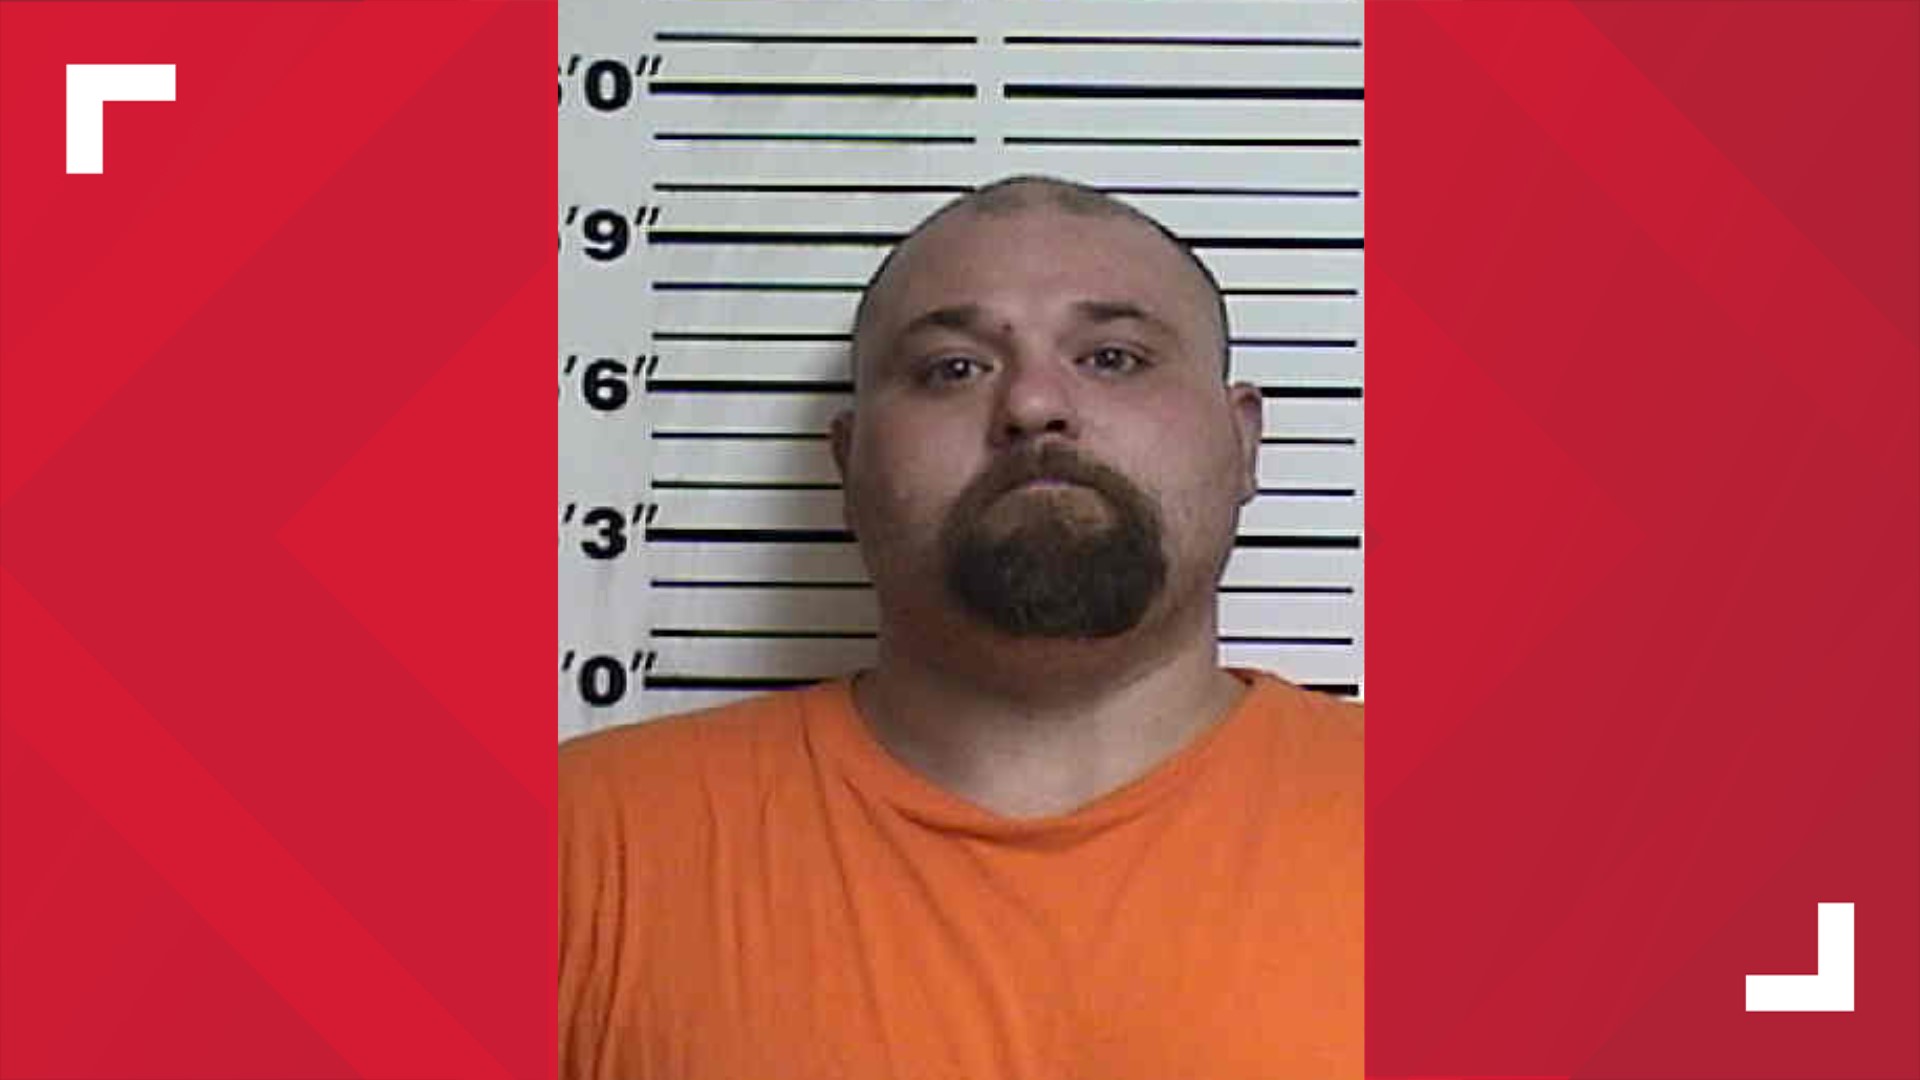 Authorities say David Boley assaulted an Appanoose County deputy and had been at large prior to his arrest.